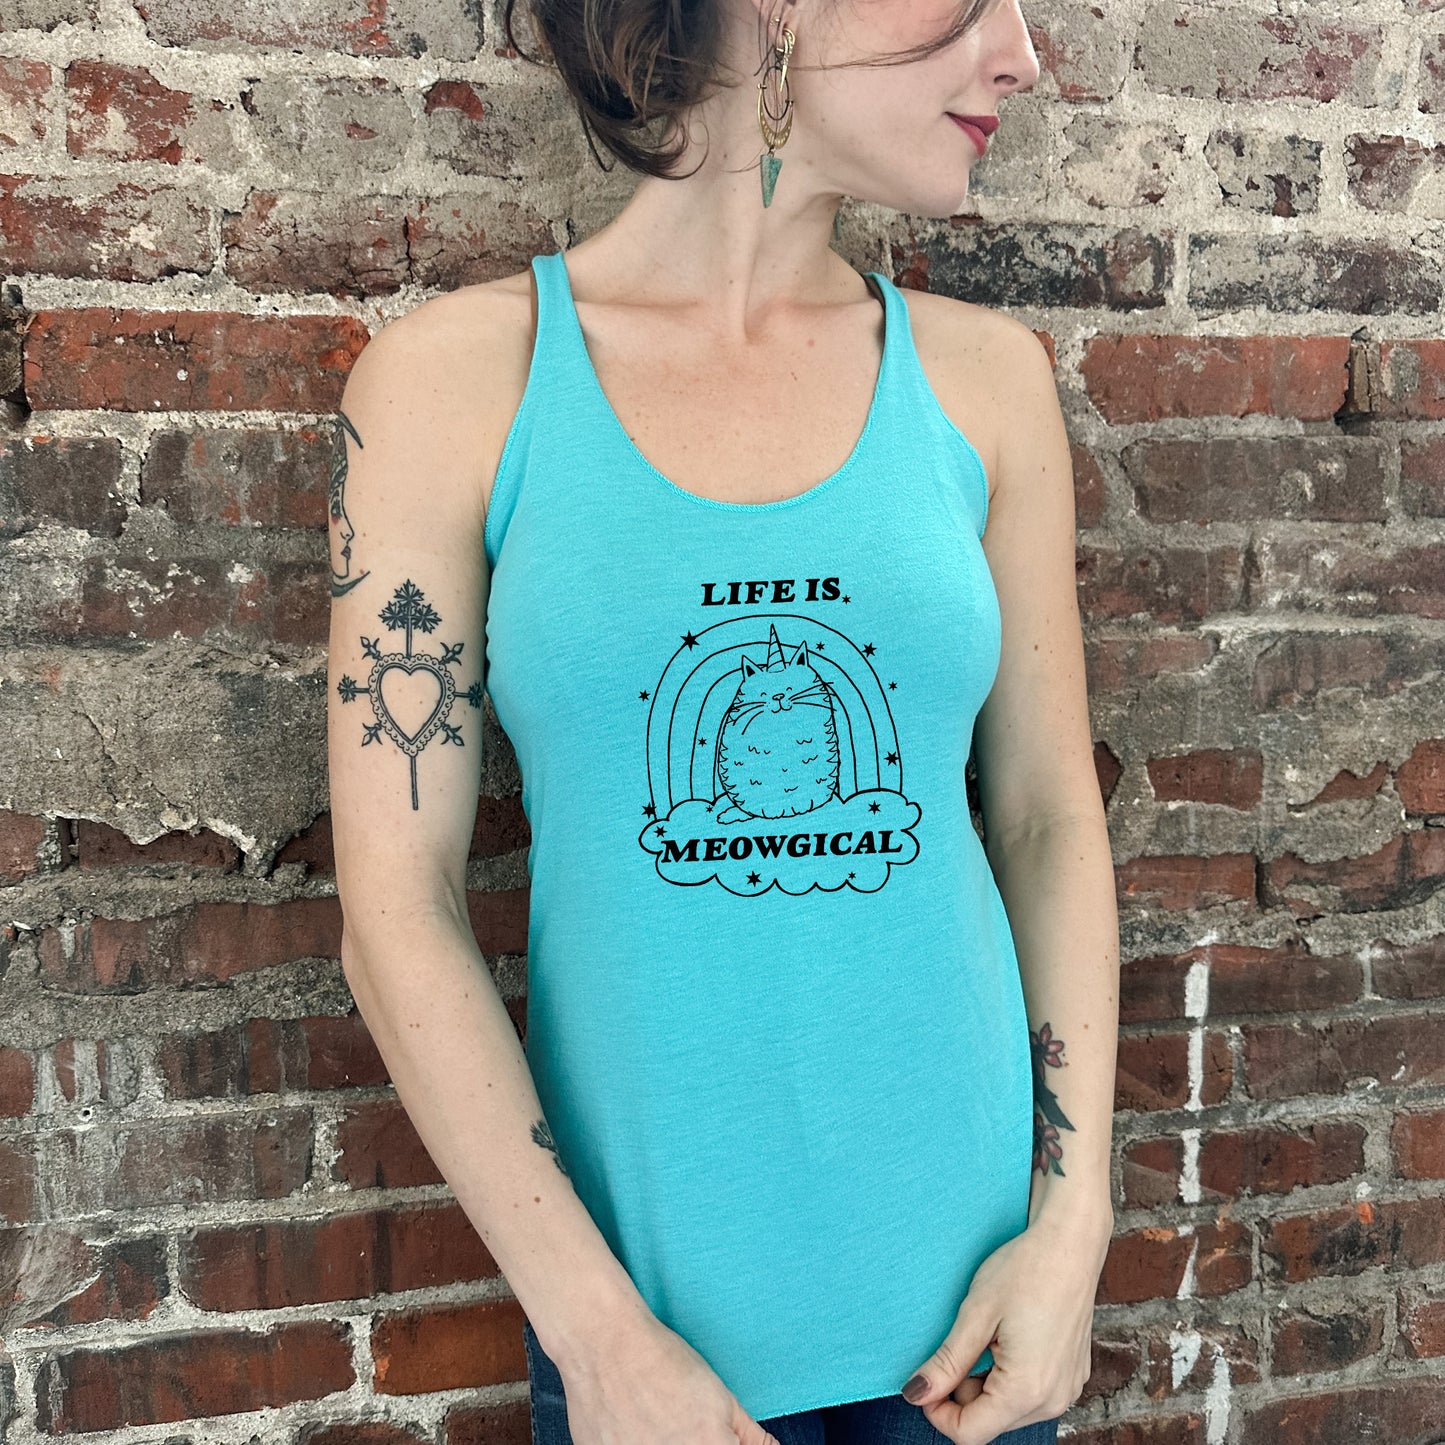 Life Is Meowgical (Cat) - Women's Tank - Heather Gray, Tahiti, or Envy